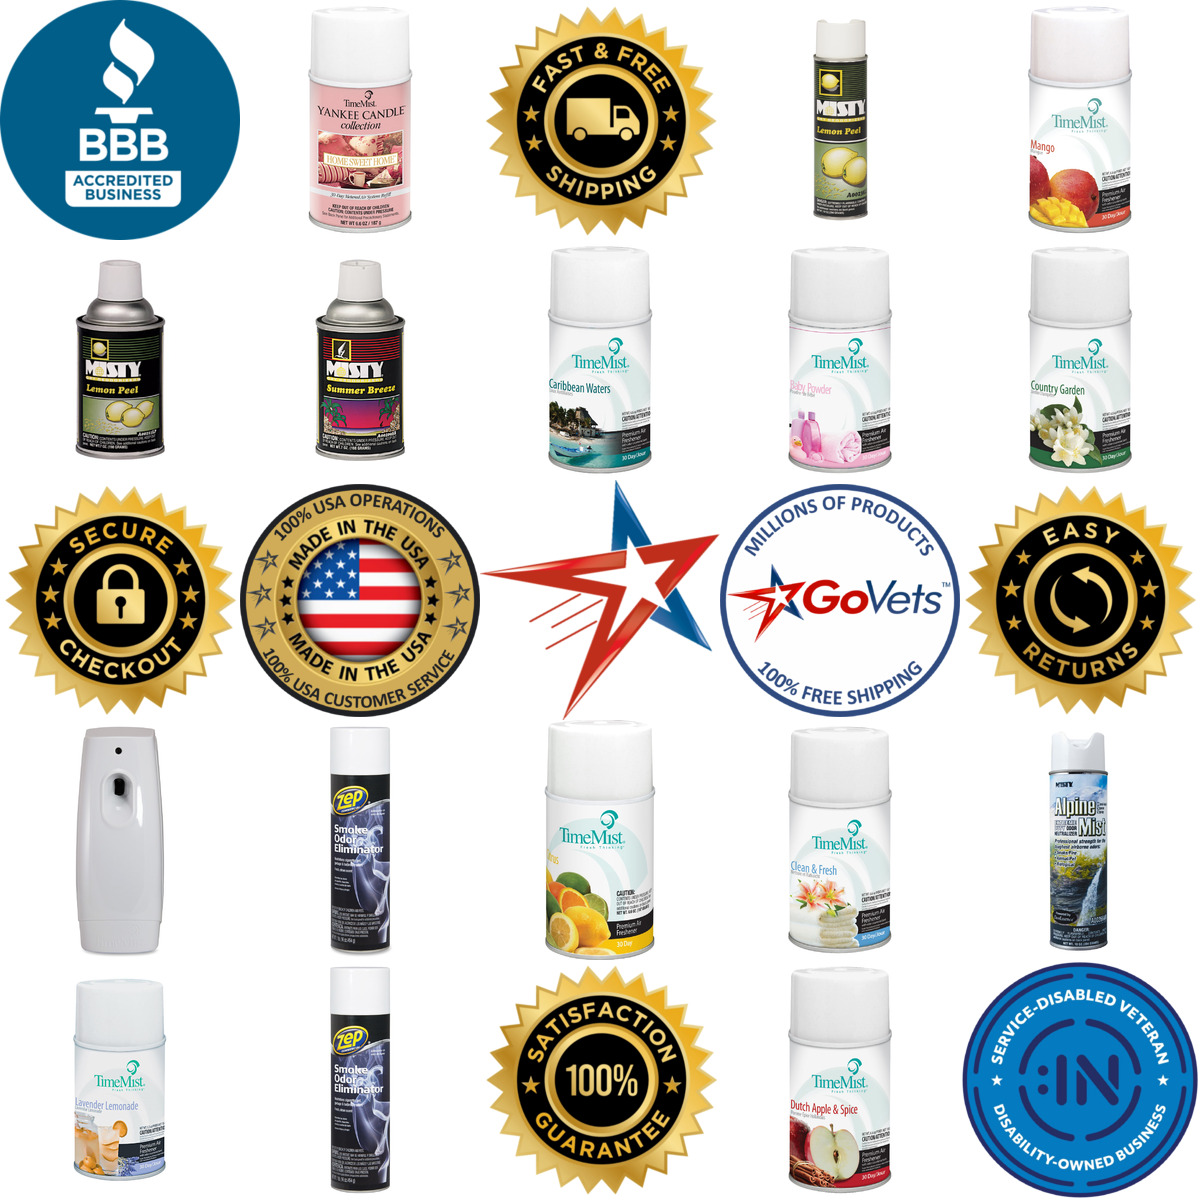 A selection of Zep inc. products on GoVets